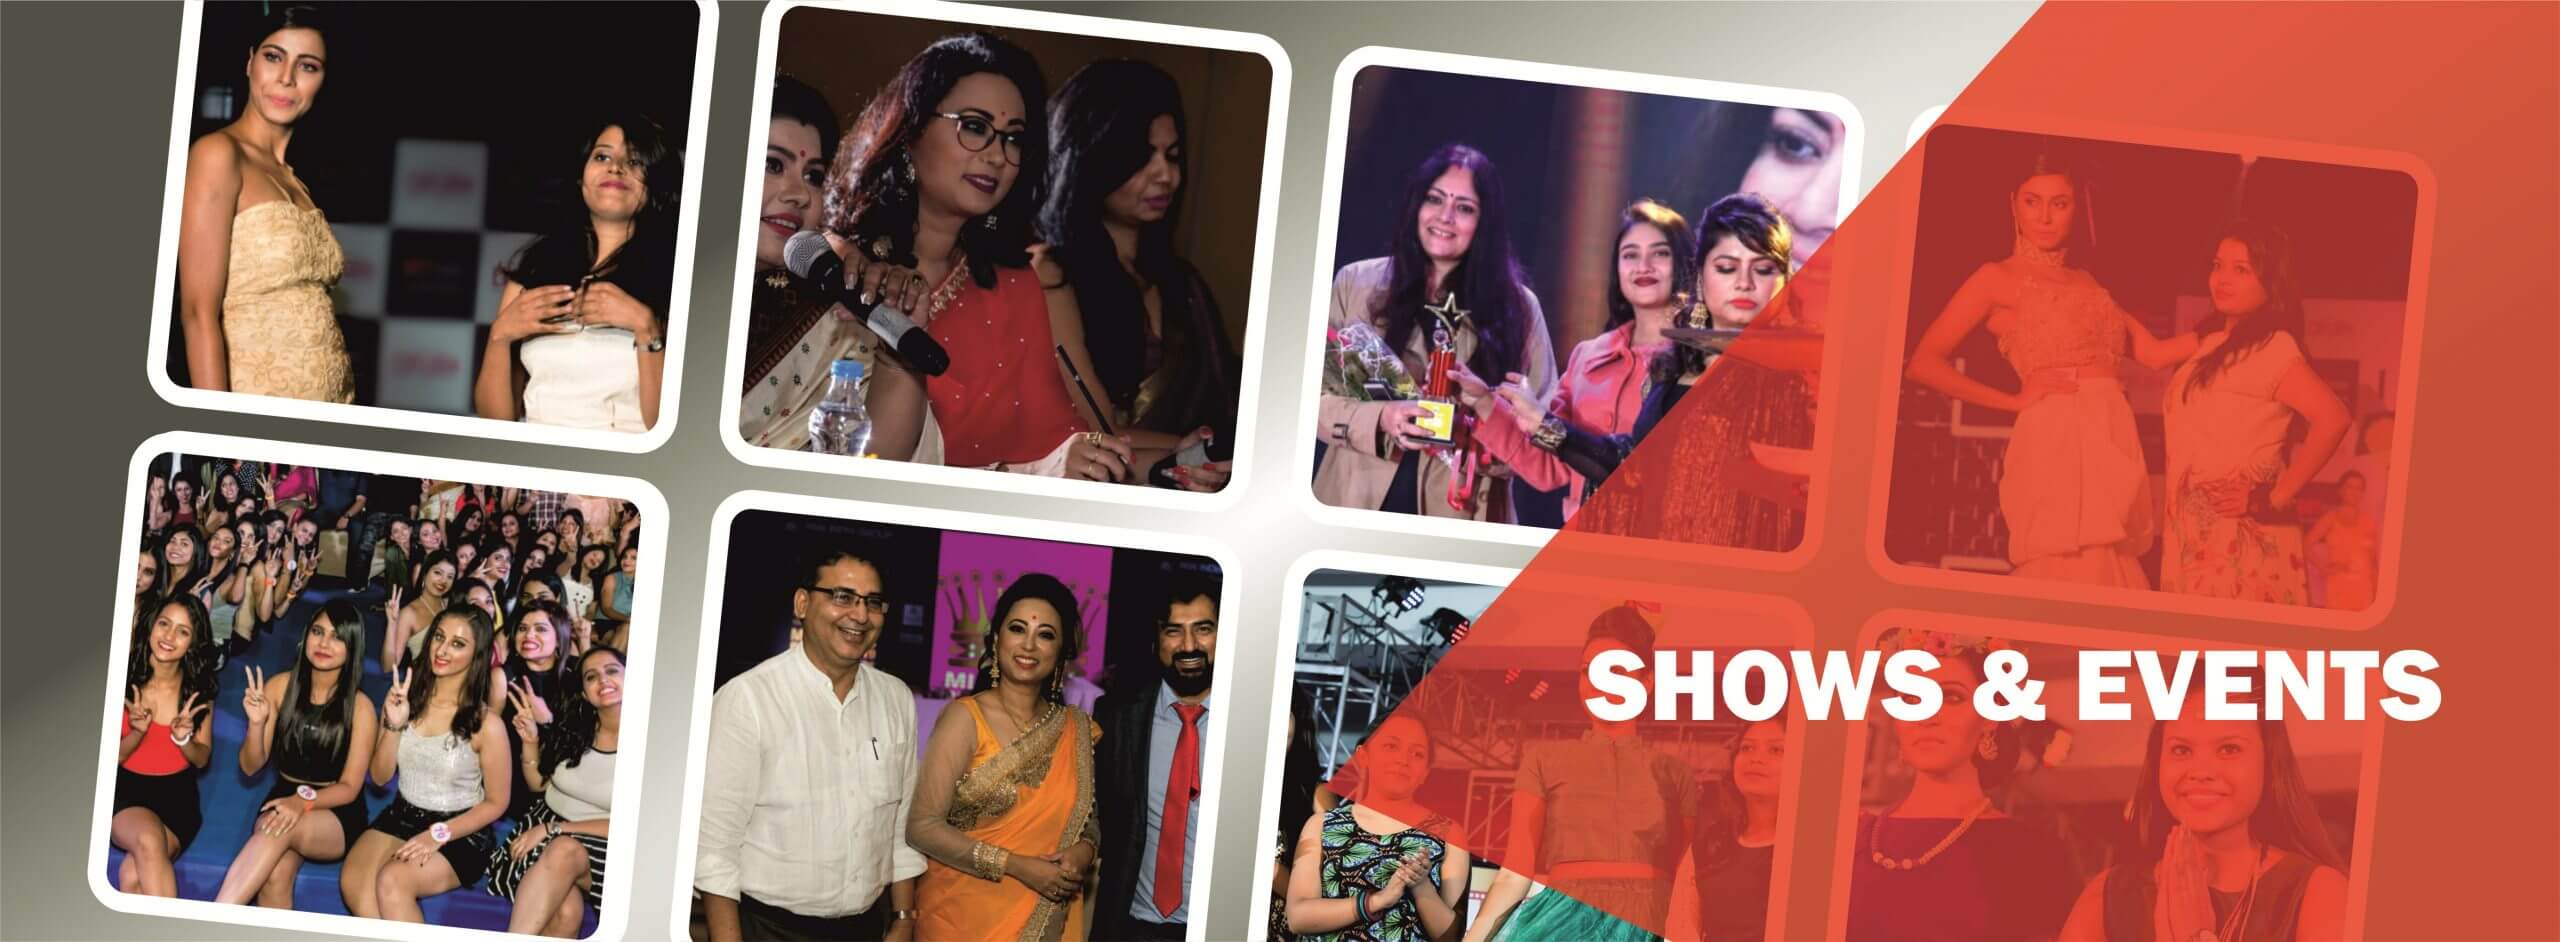 Banner glimpse of fashion shows and events conducted in kolkata y the INIFT institution